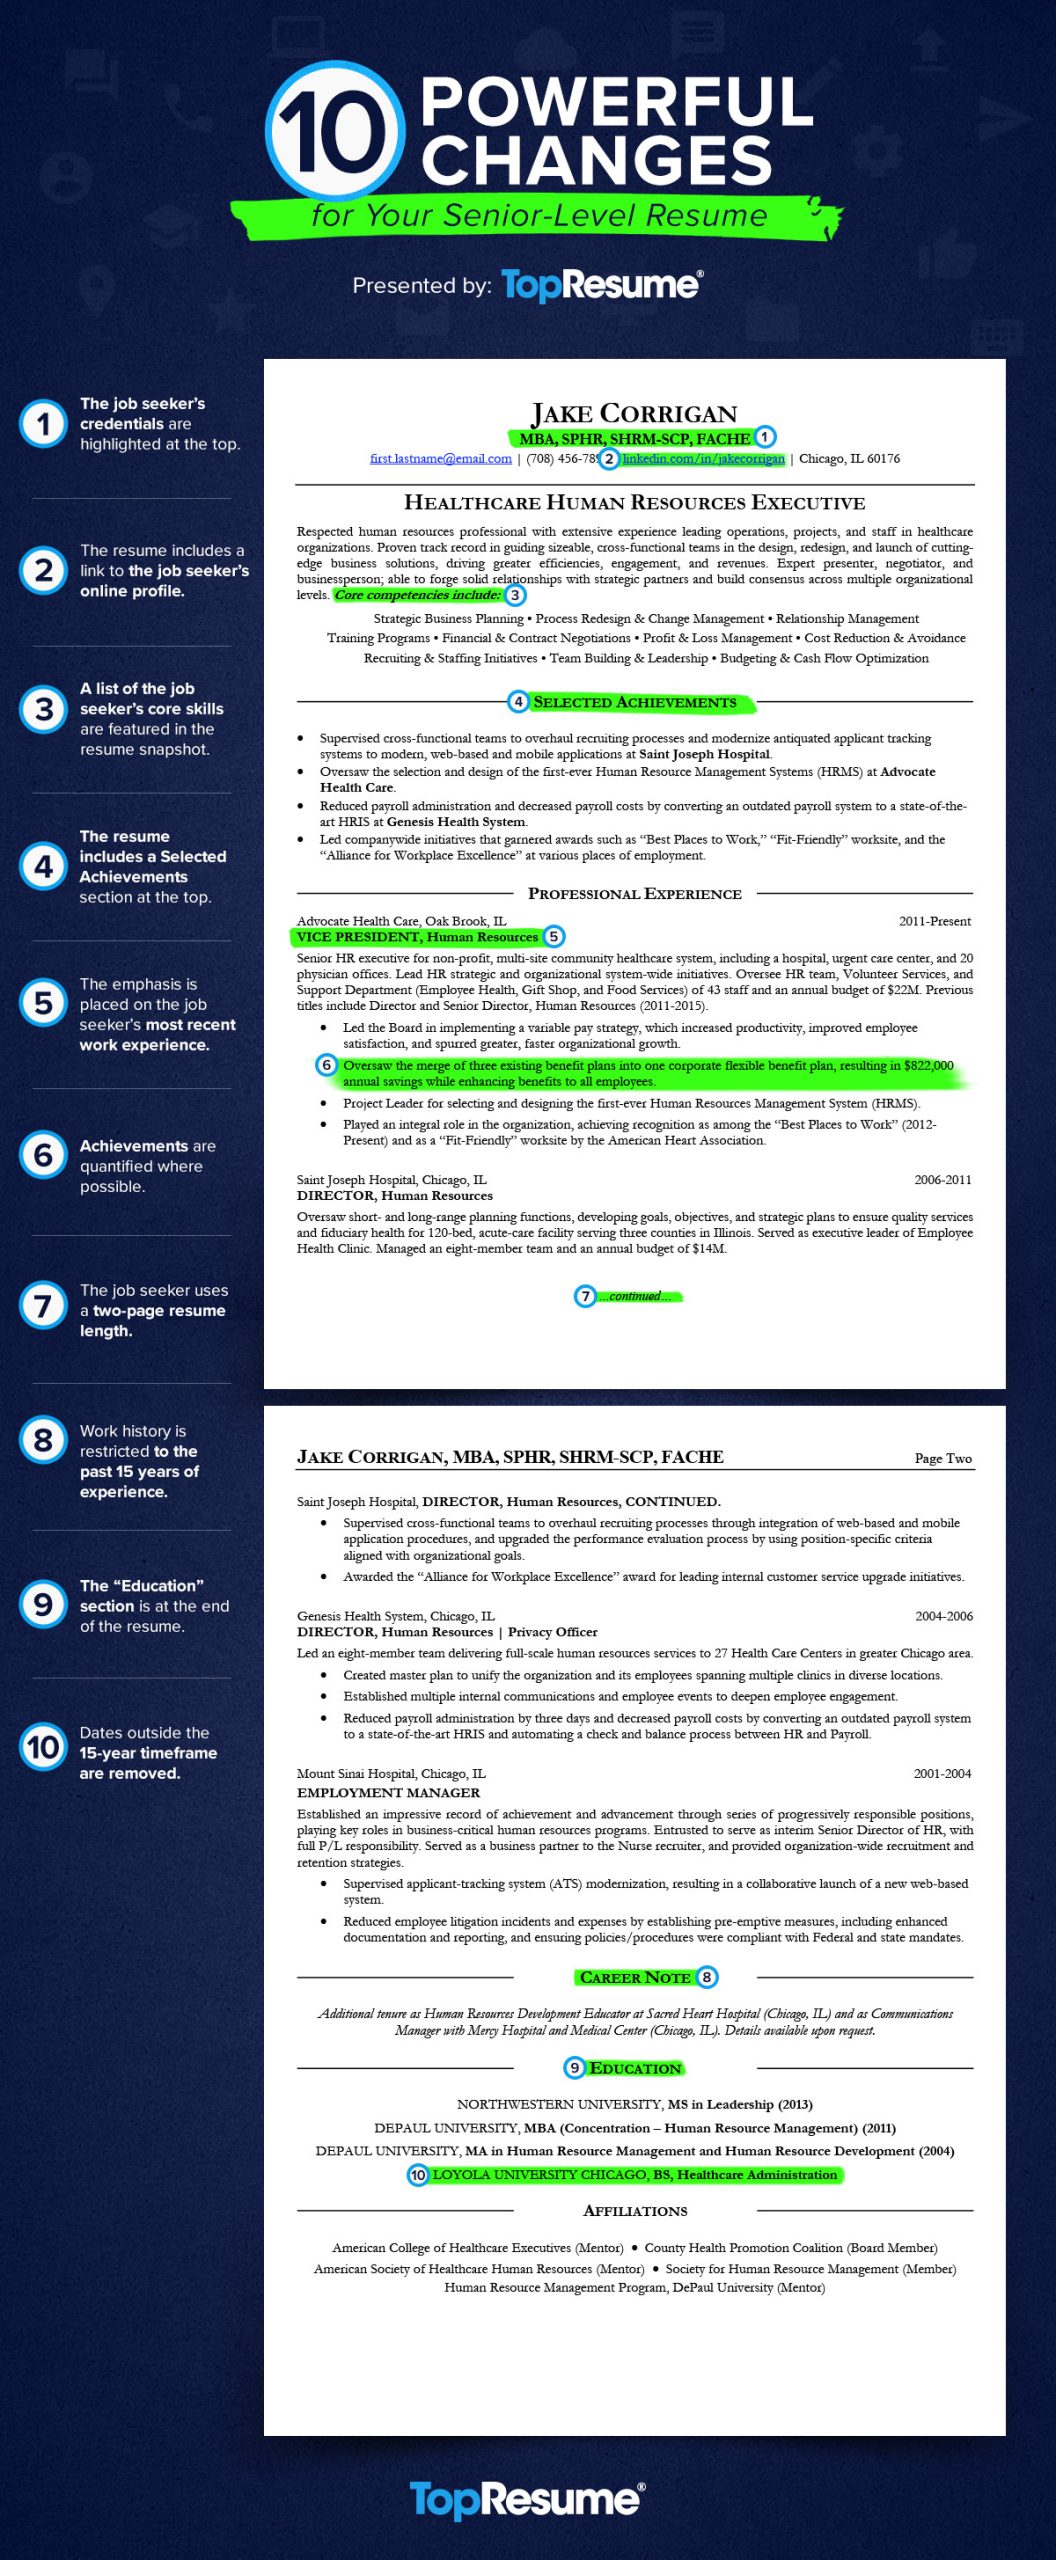 Sample Resume for Senior Level Position 10 Powerful Changes for Your Executive-level Resume topresume